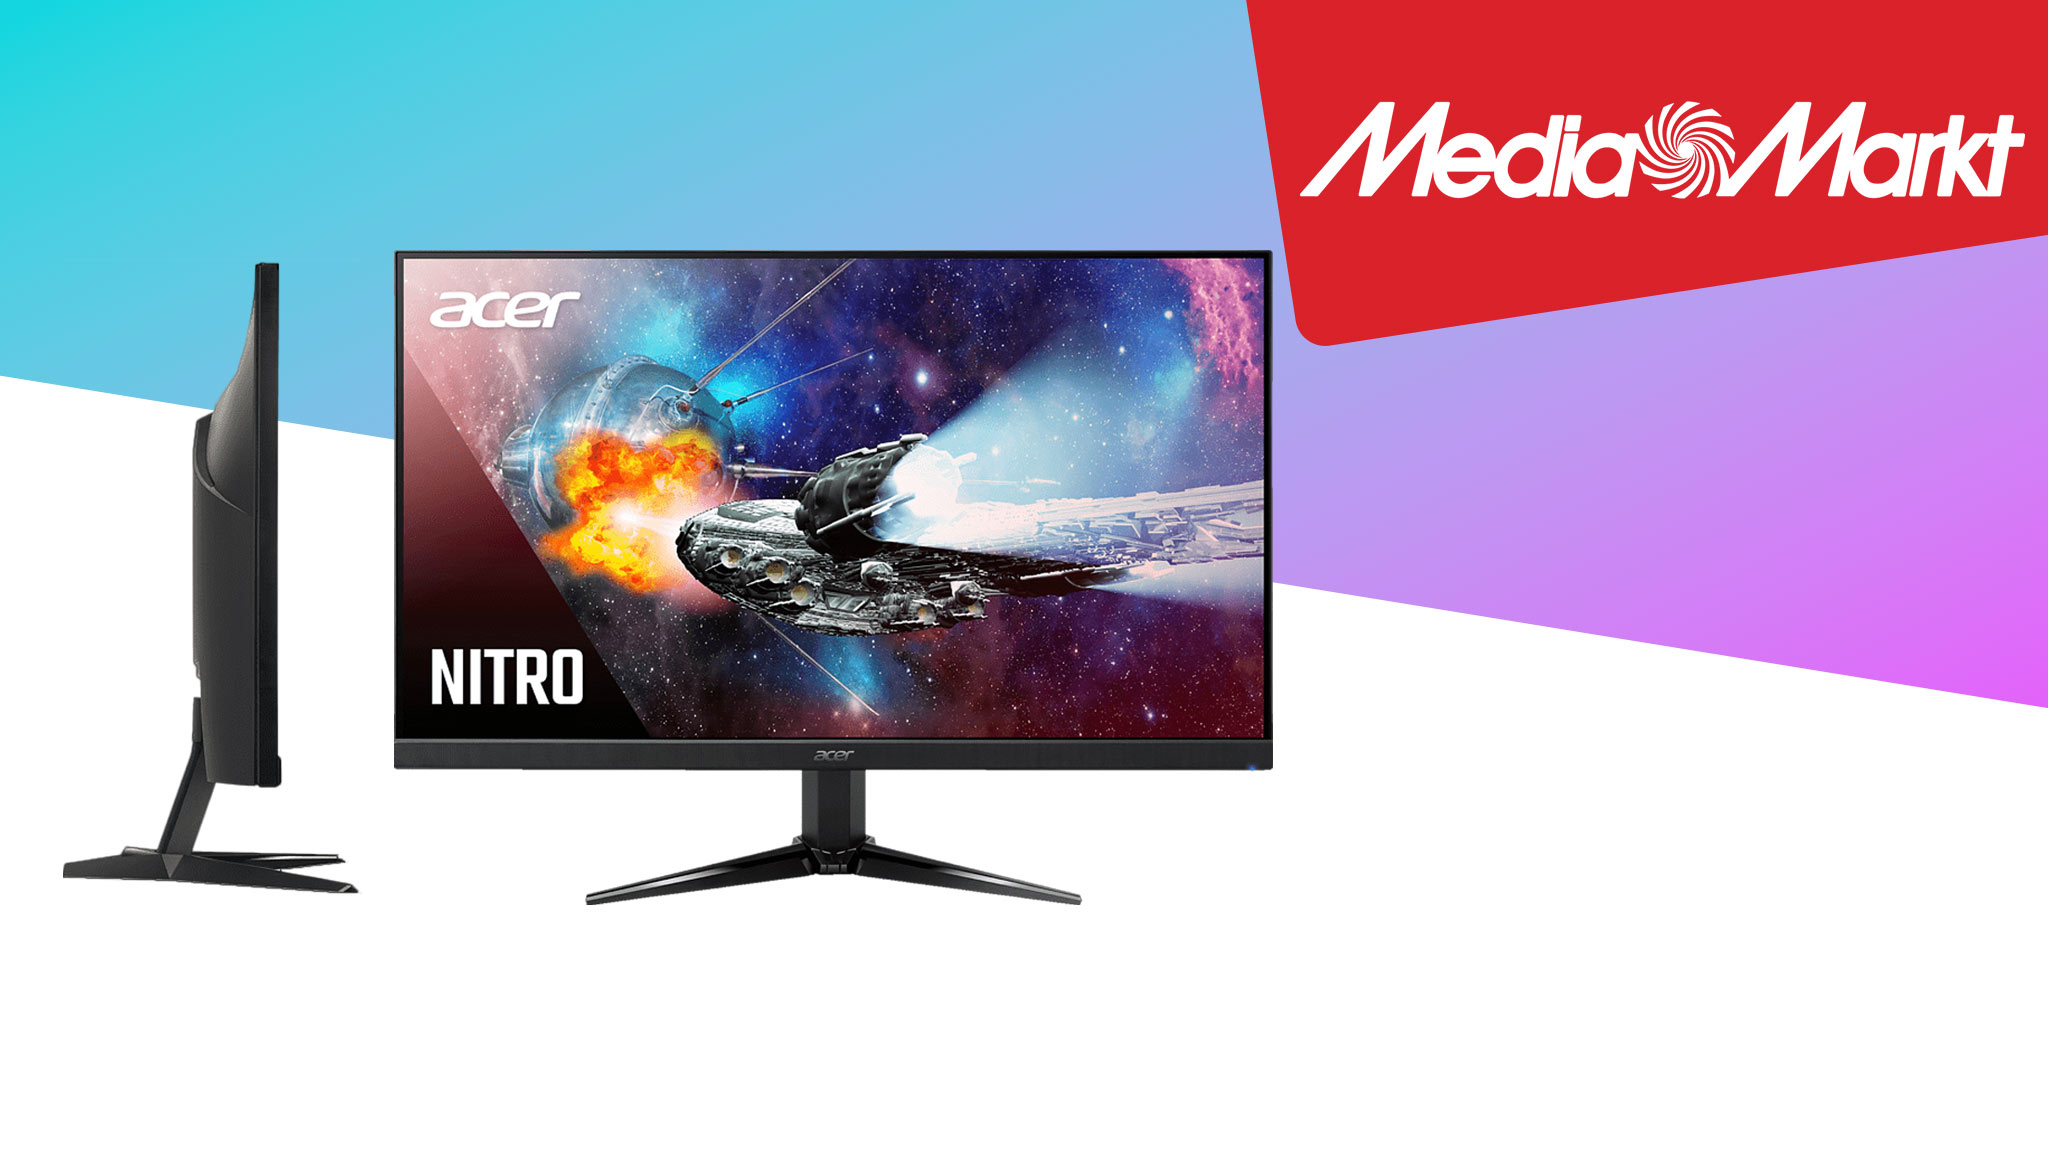 Gaming monitor at Media Markt: buy an Acer for only € 139